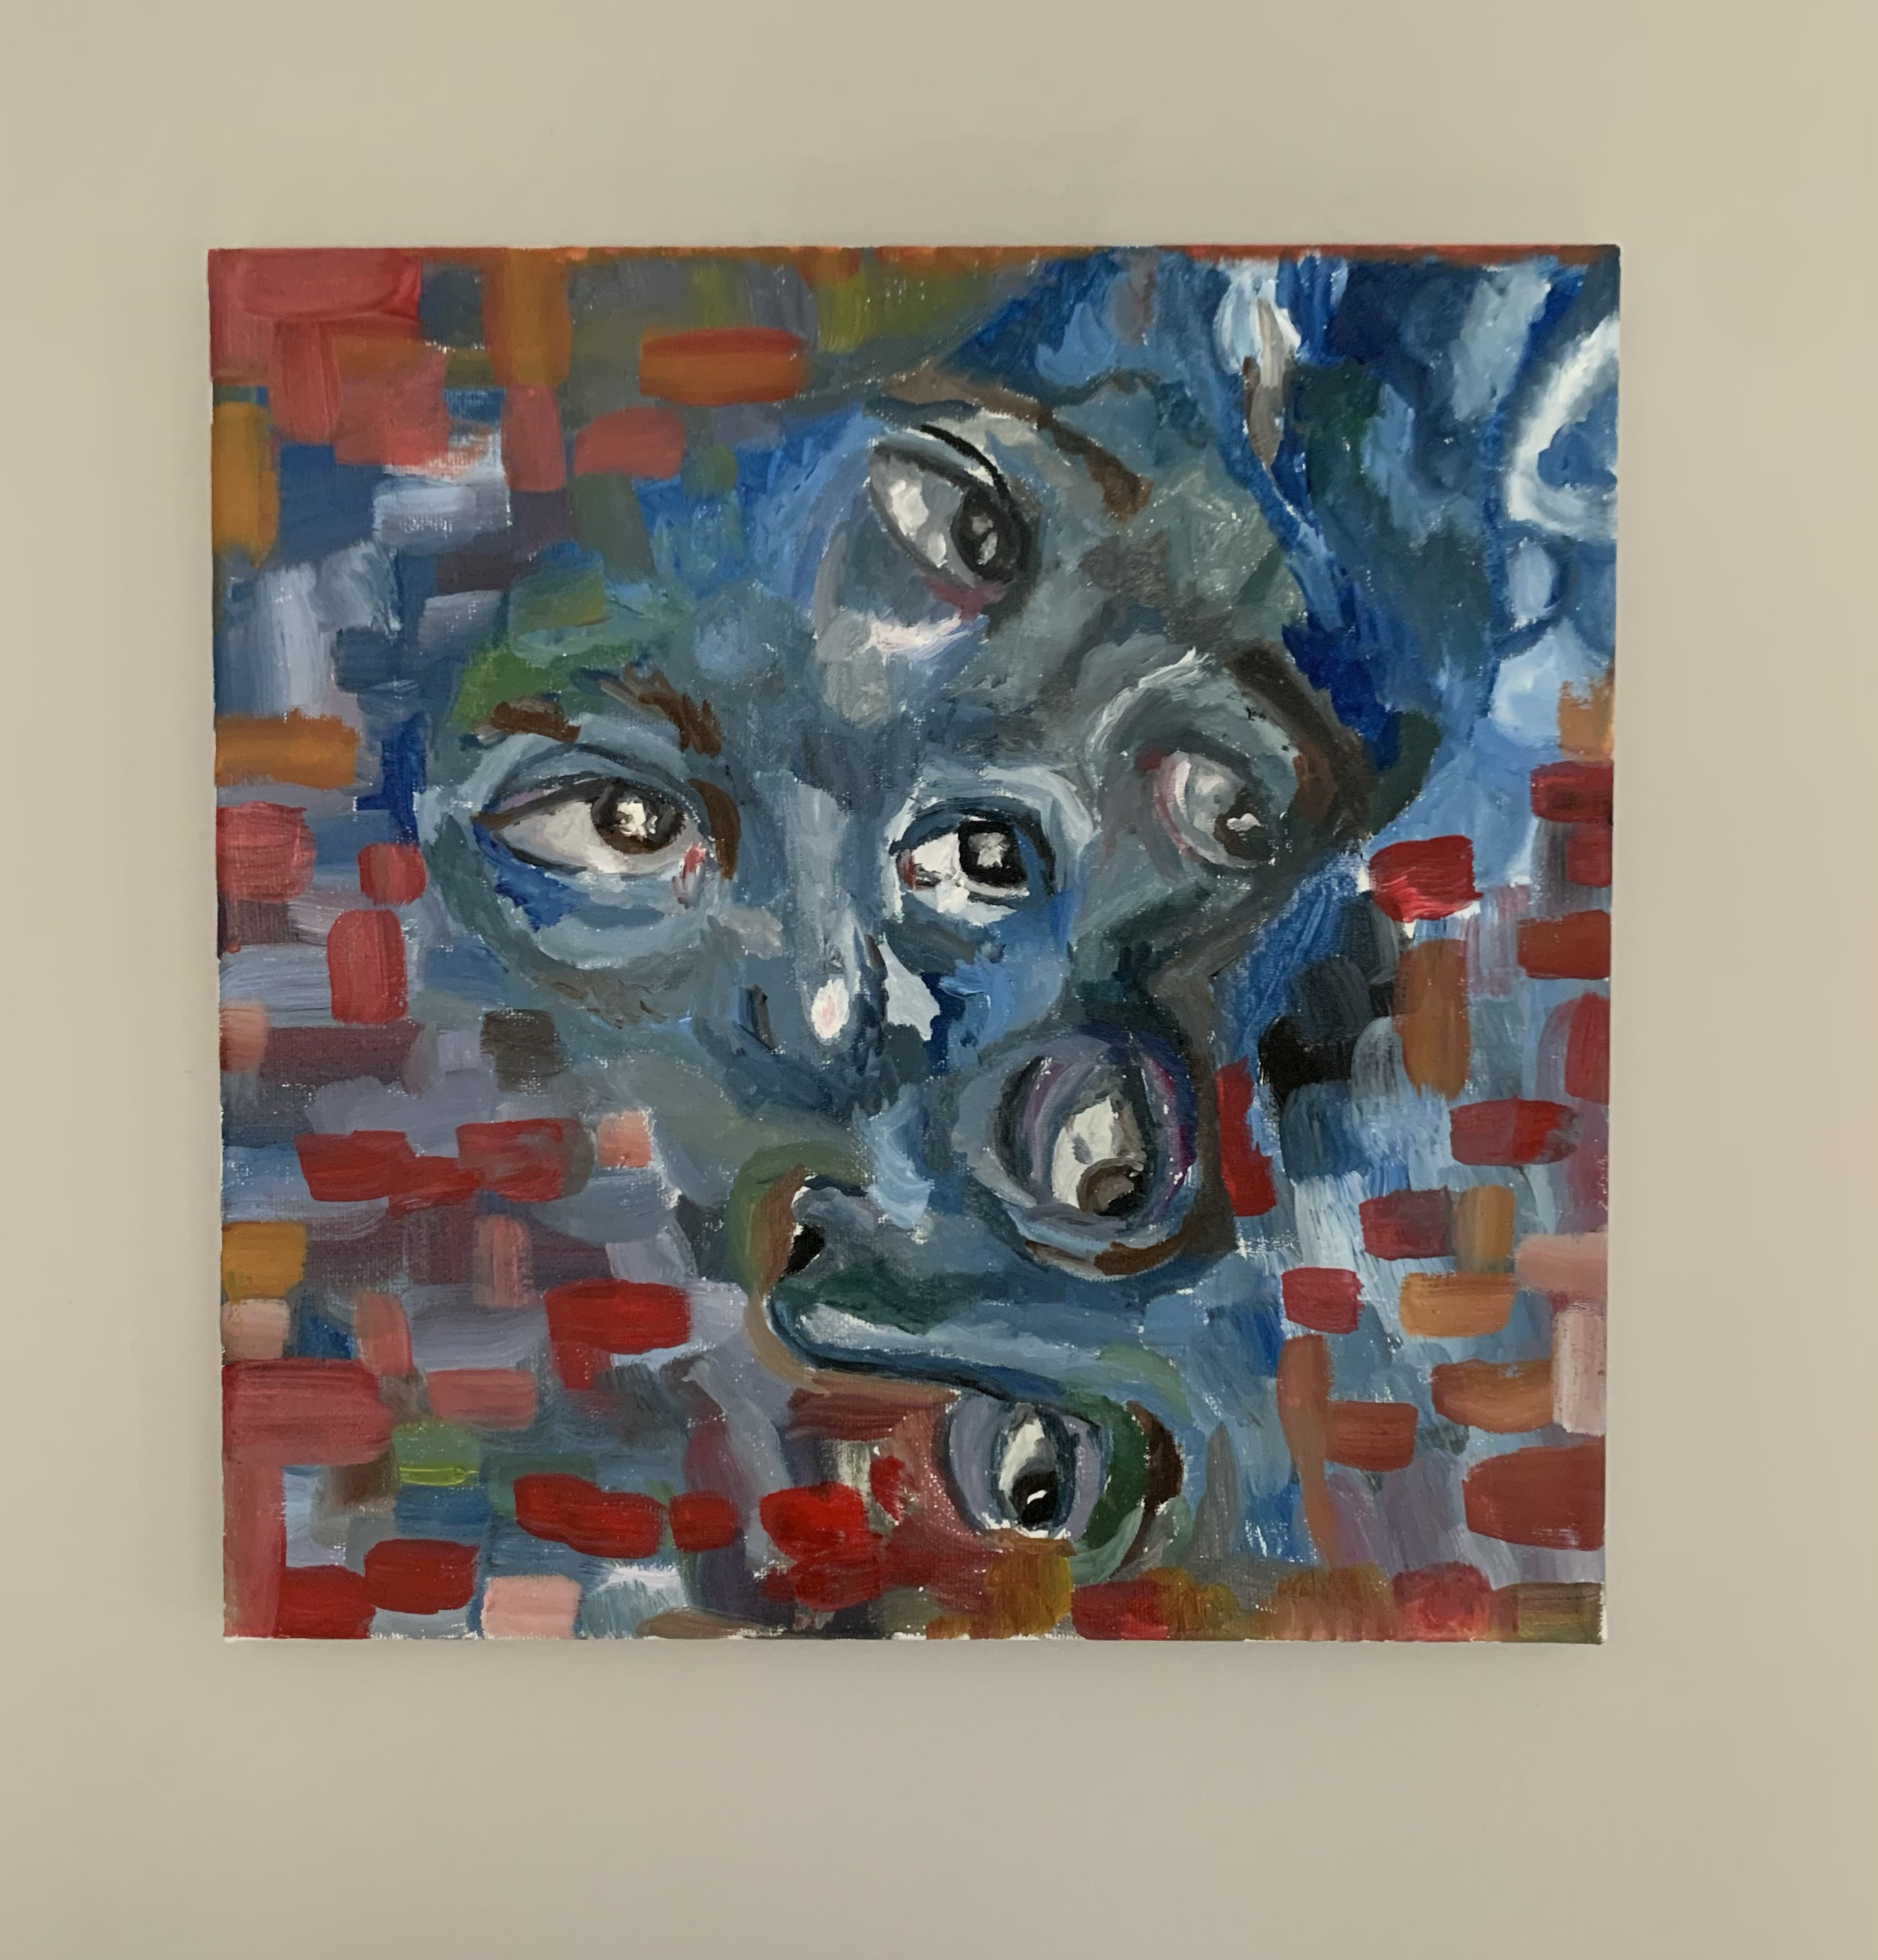 An abstract painting with a series of eyes painted at its center.  